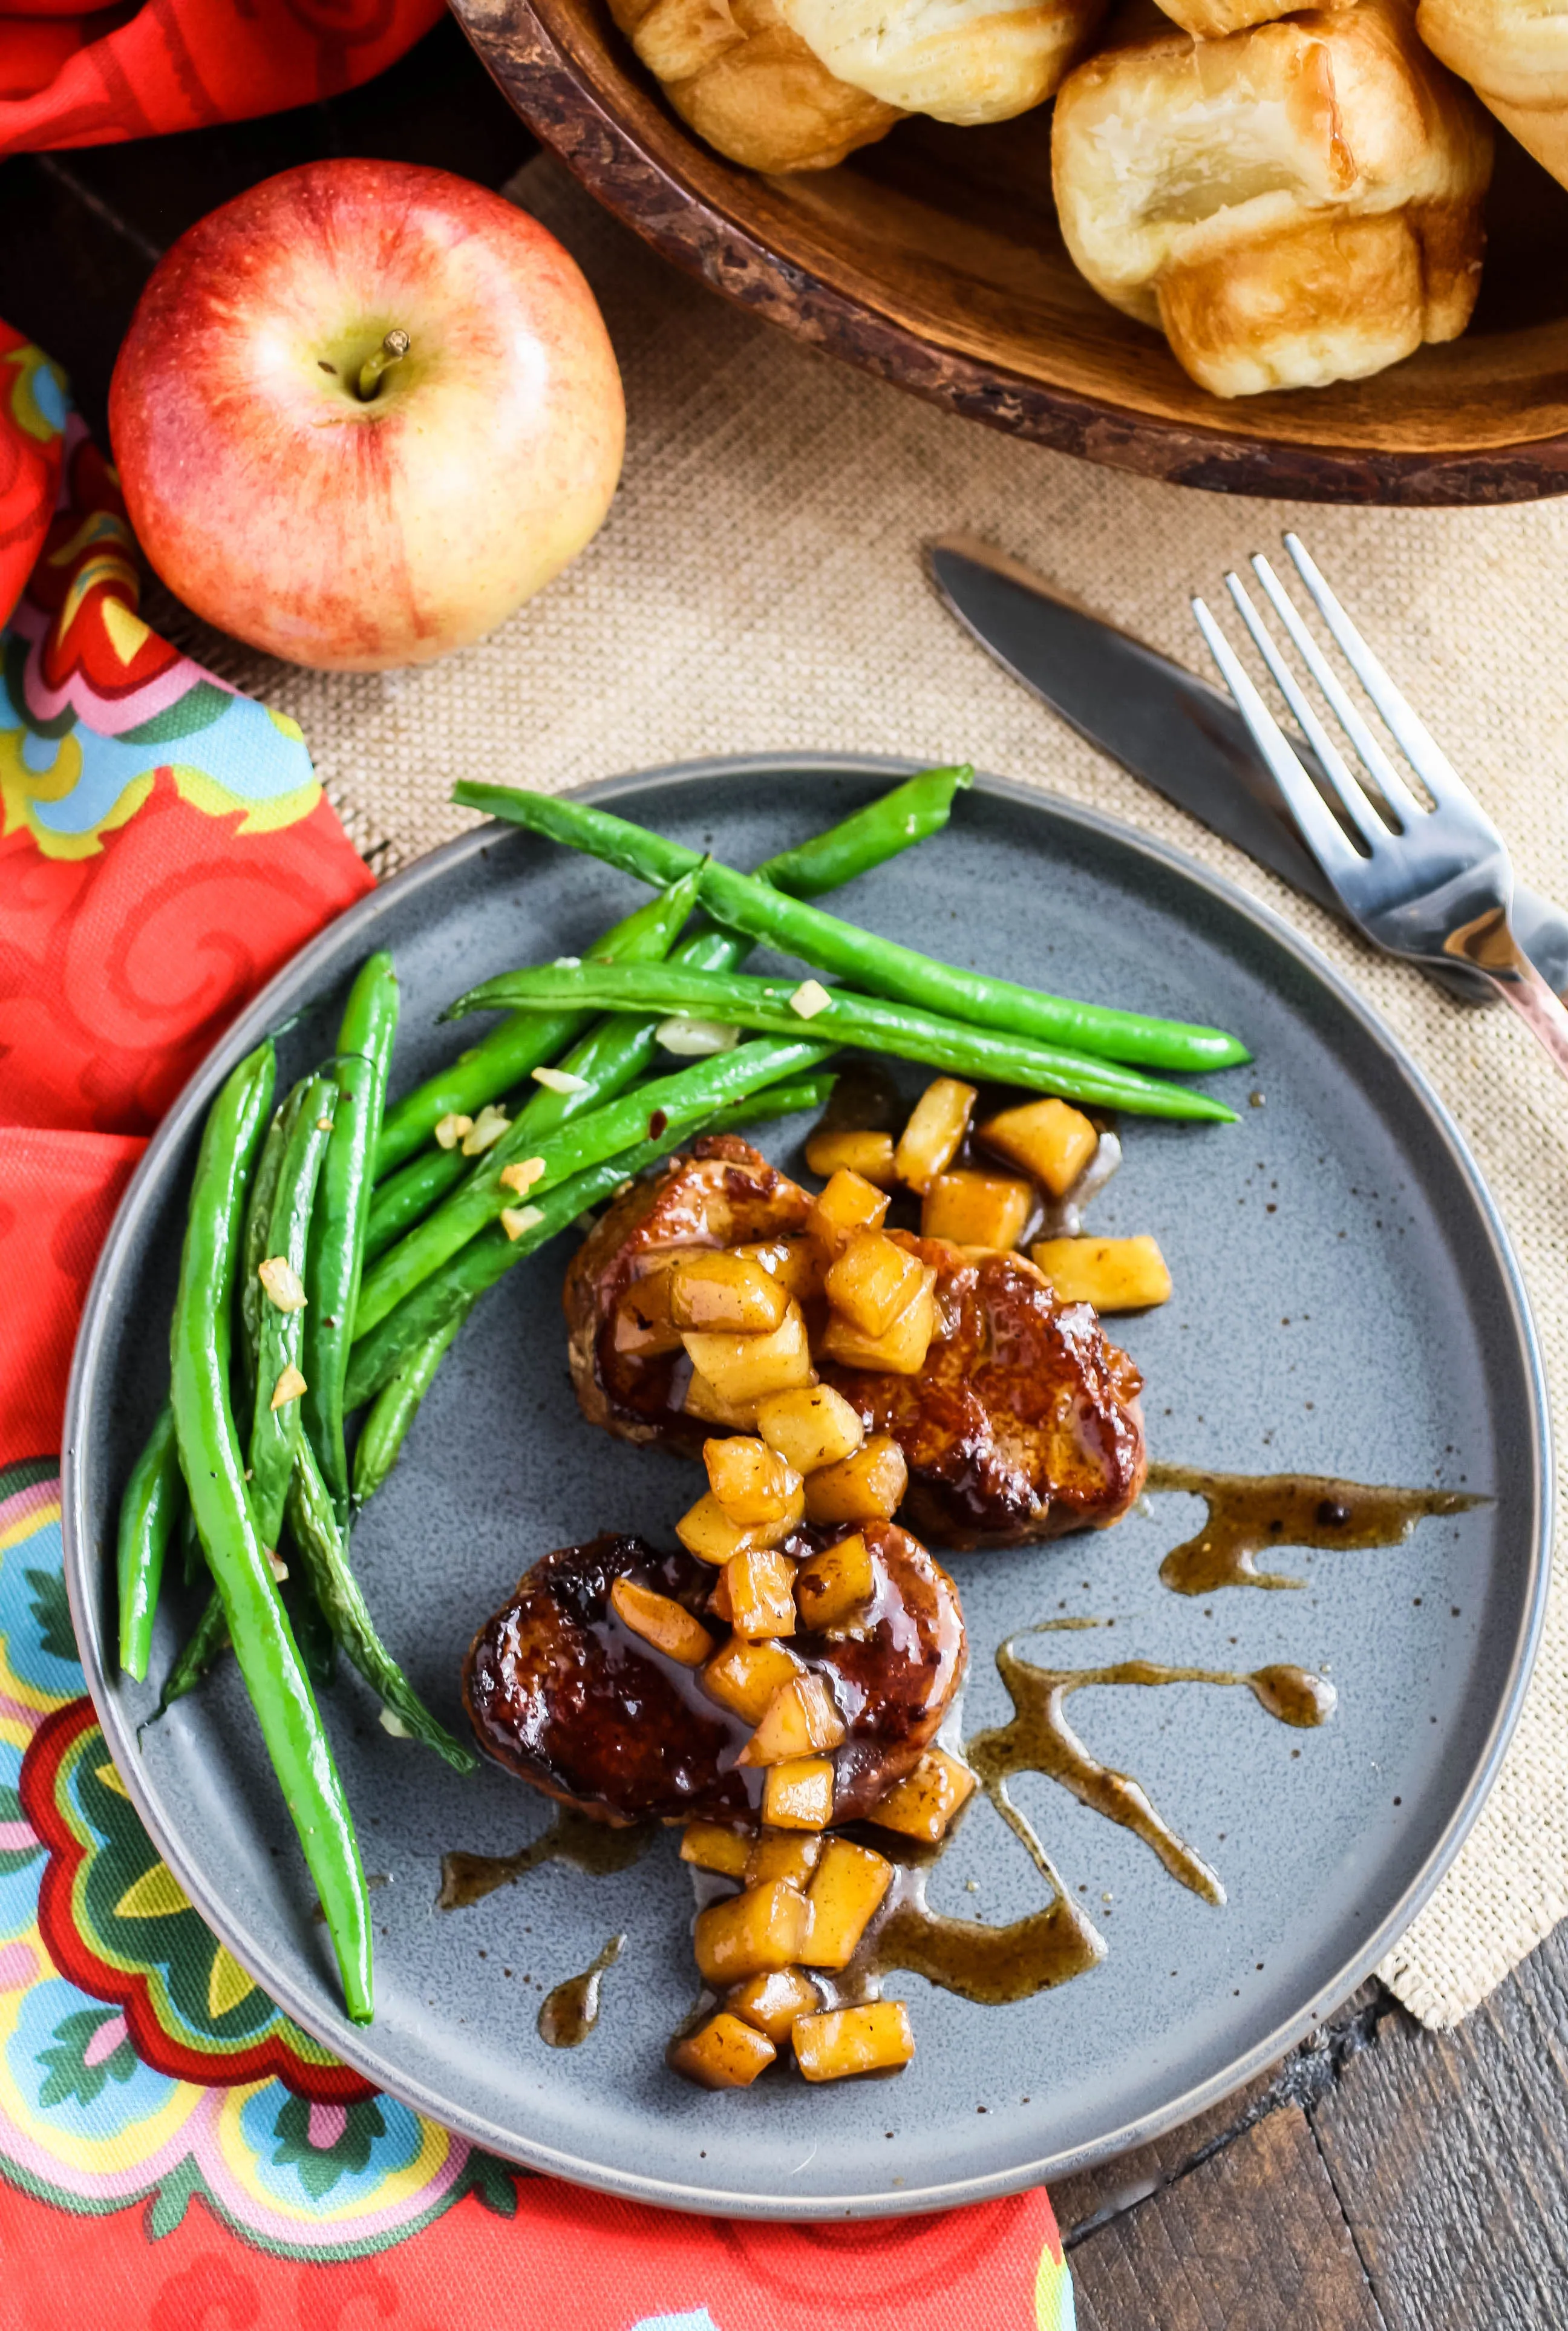 Caramel Apple Pork Medallions is a delightful dish. Caramel Apple Pork Medallions is an ideal meal option that's easy to make.